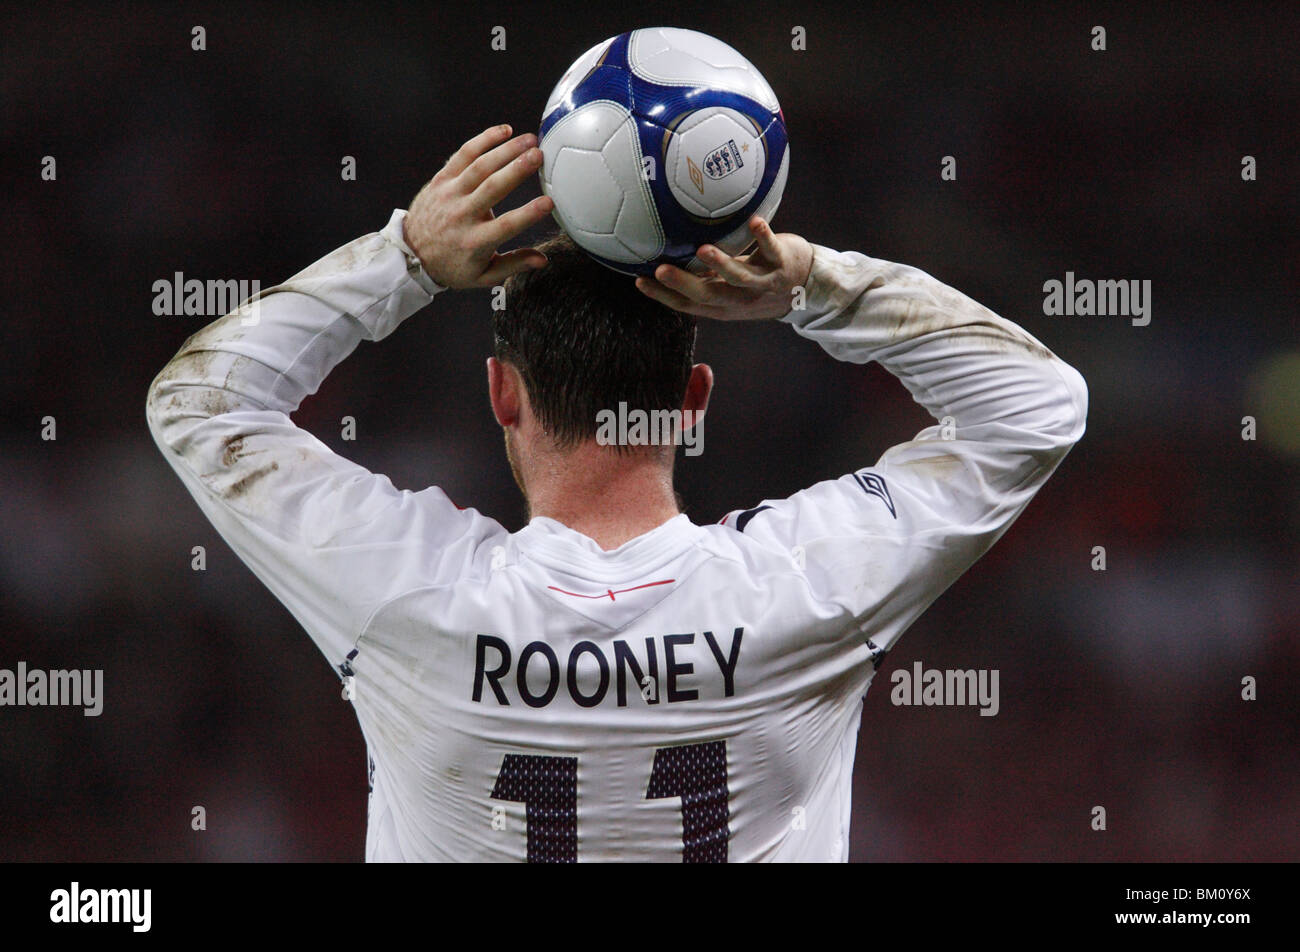 Wayne Rooney of England prepares a throw in during an international friendly against the USA at Wembley Stadium. Stock Photo